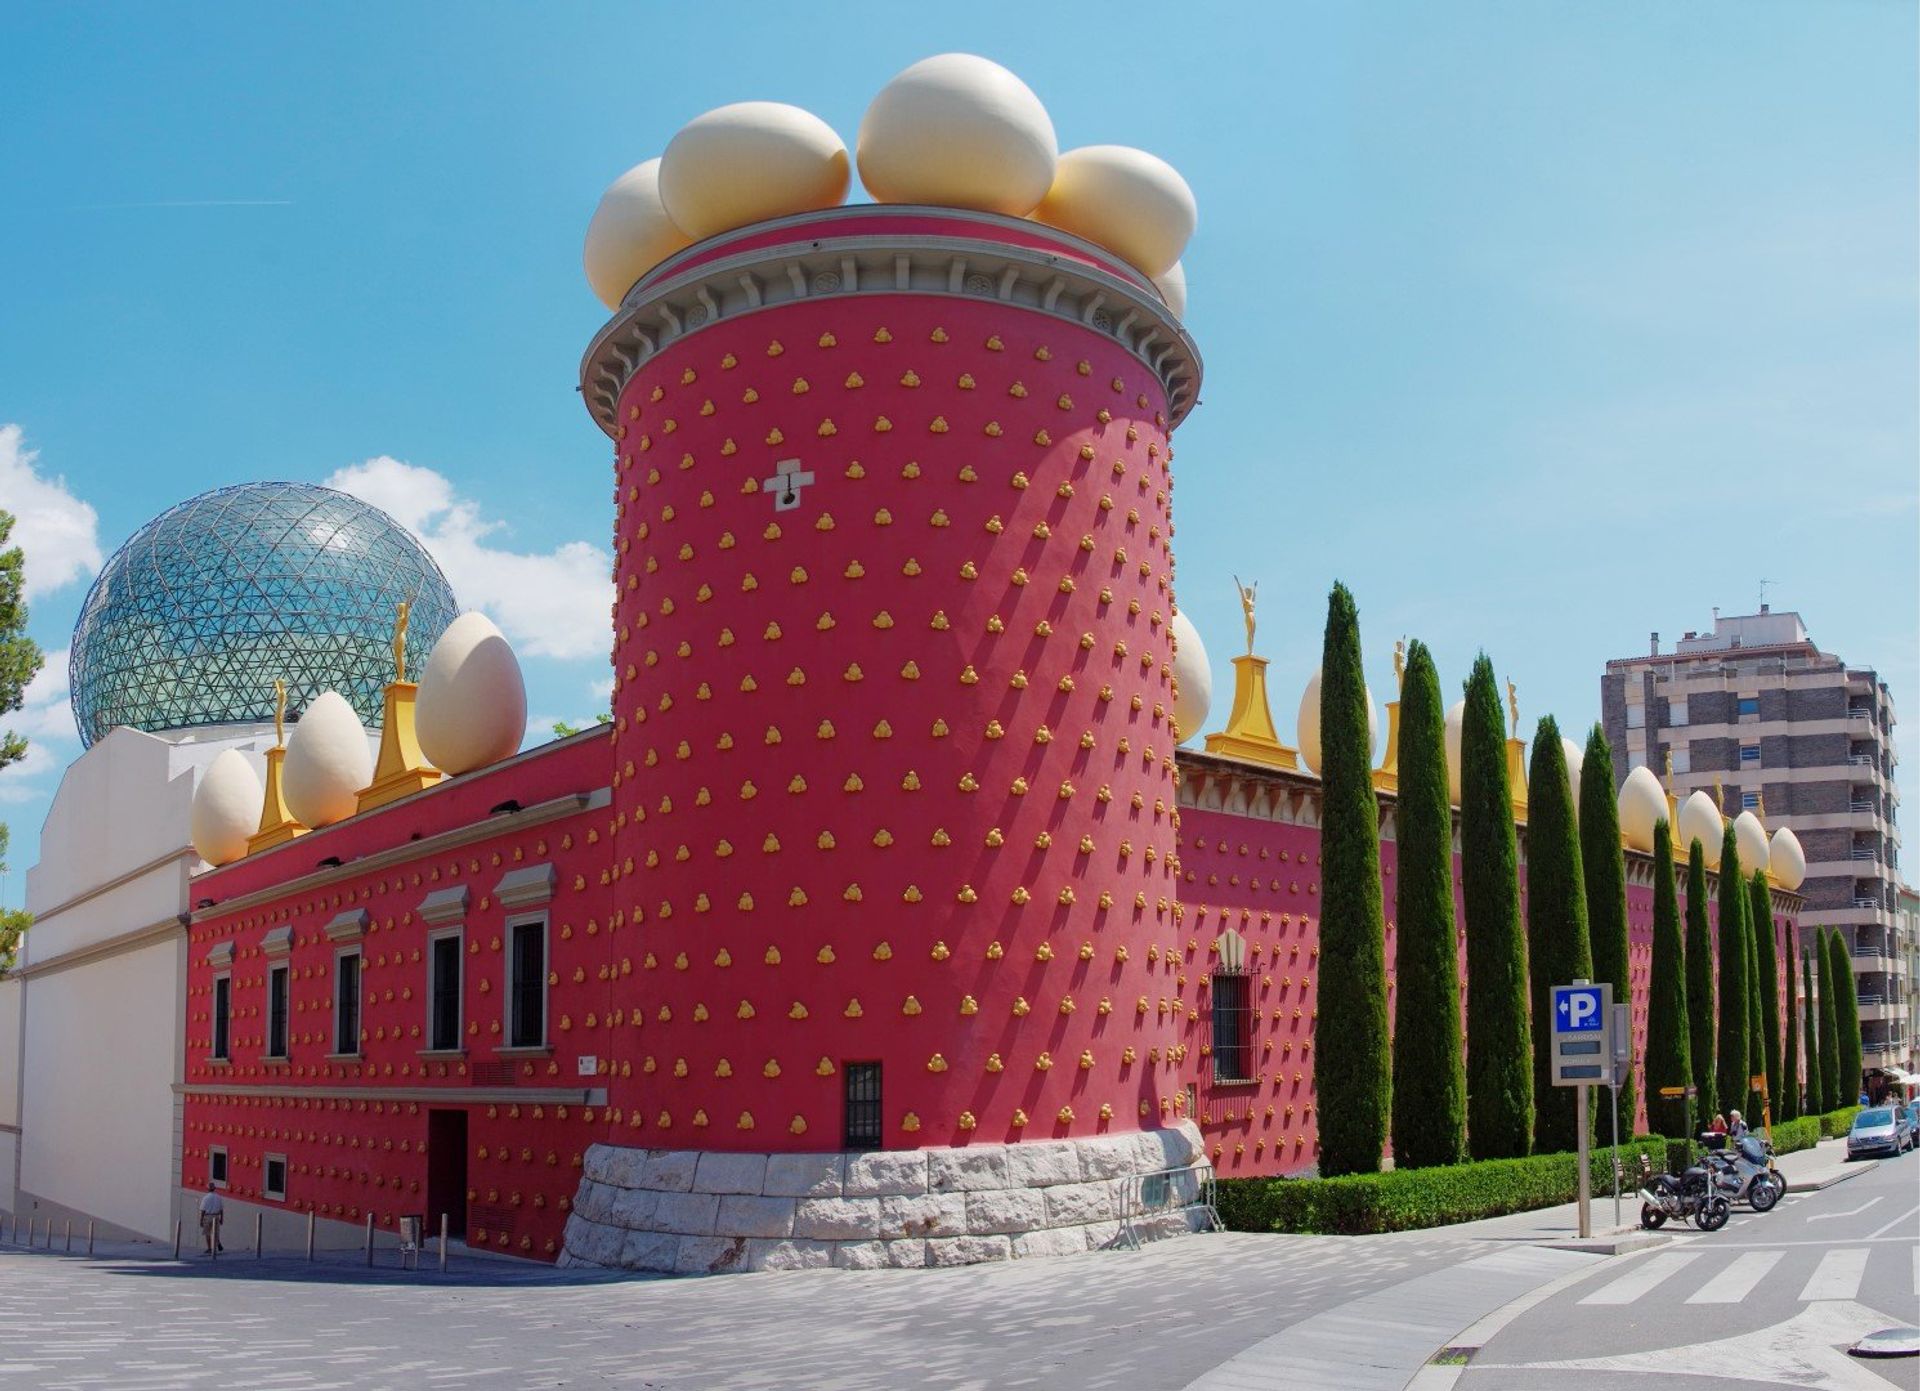 The surreal Salvador Dali Museum in Figueres, Girona